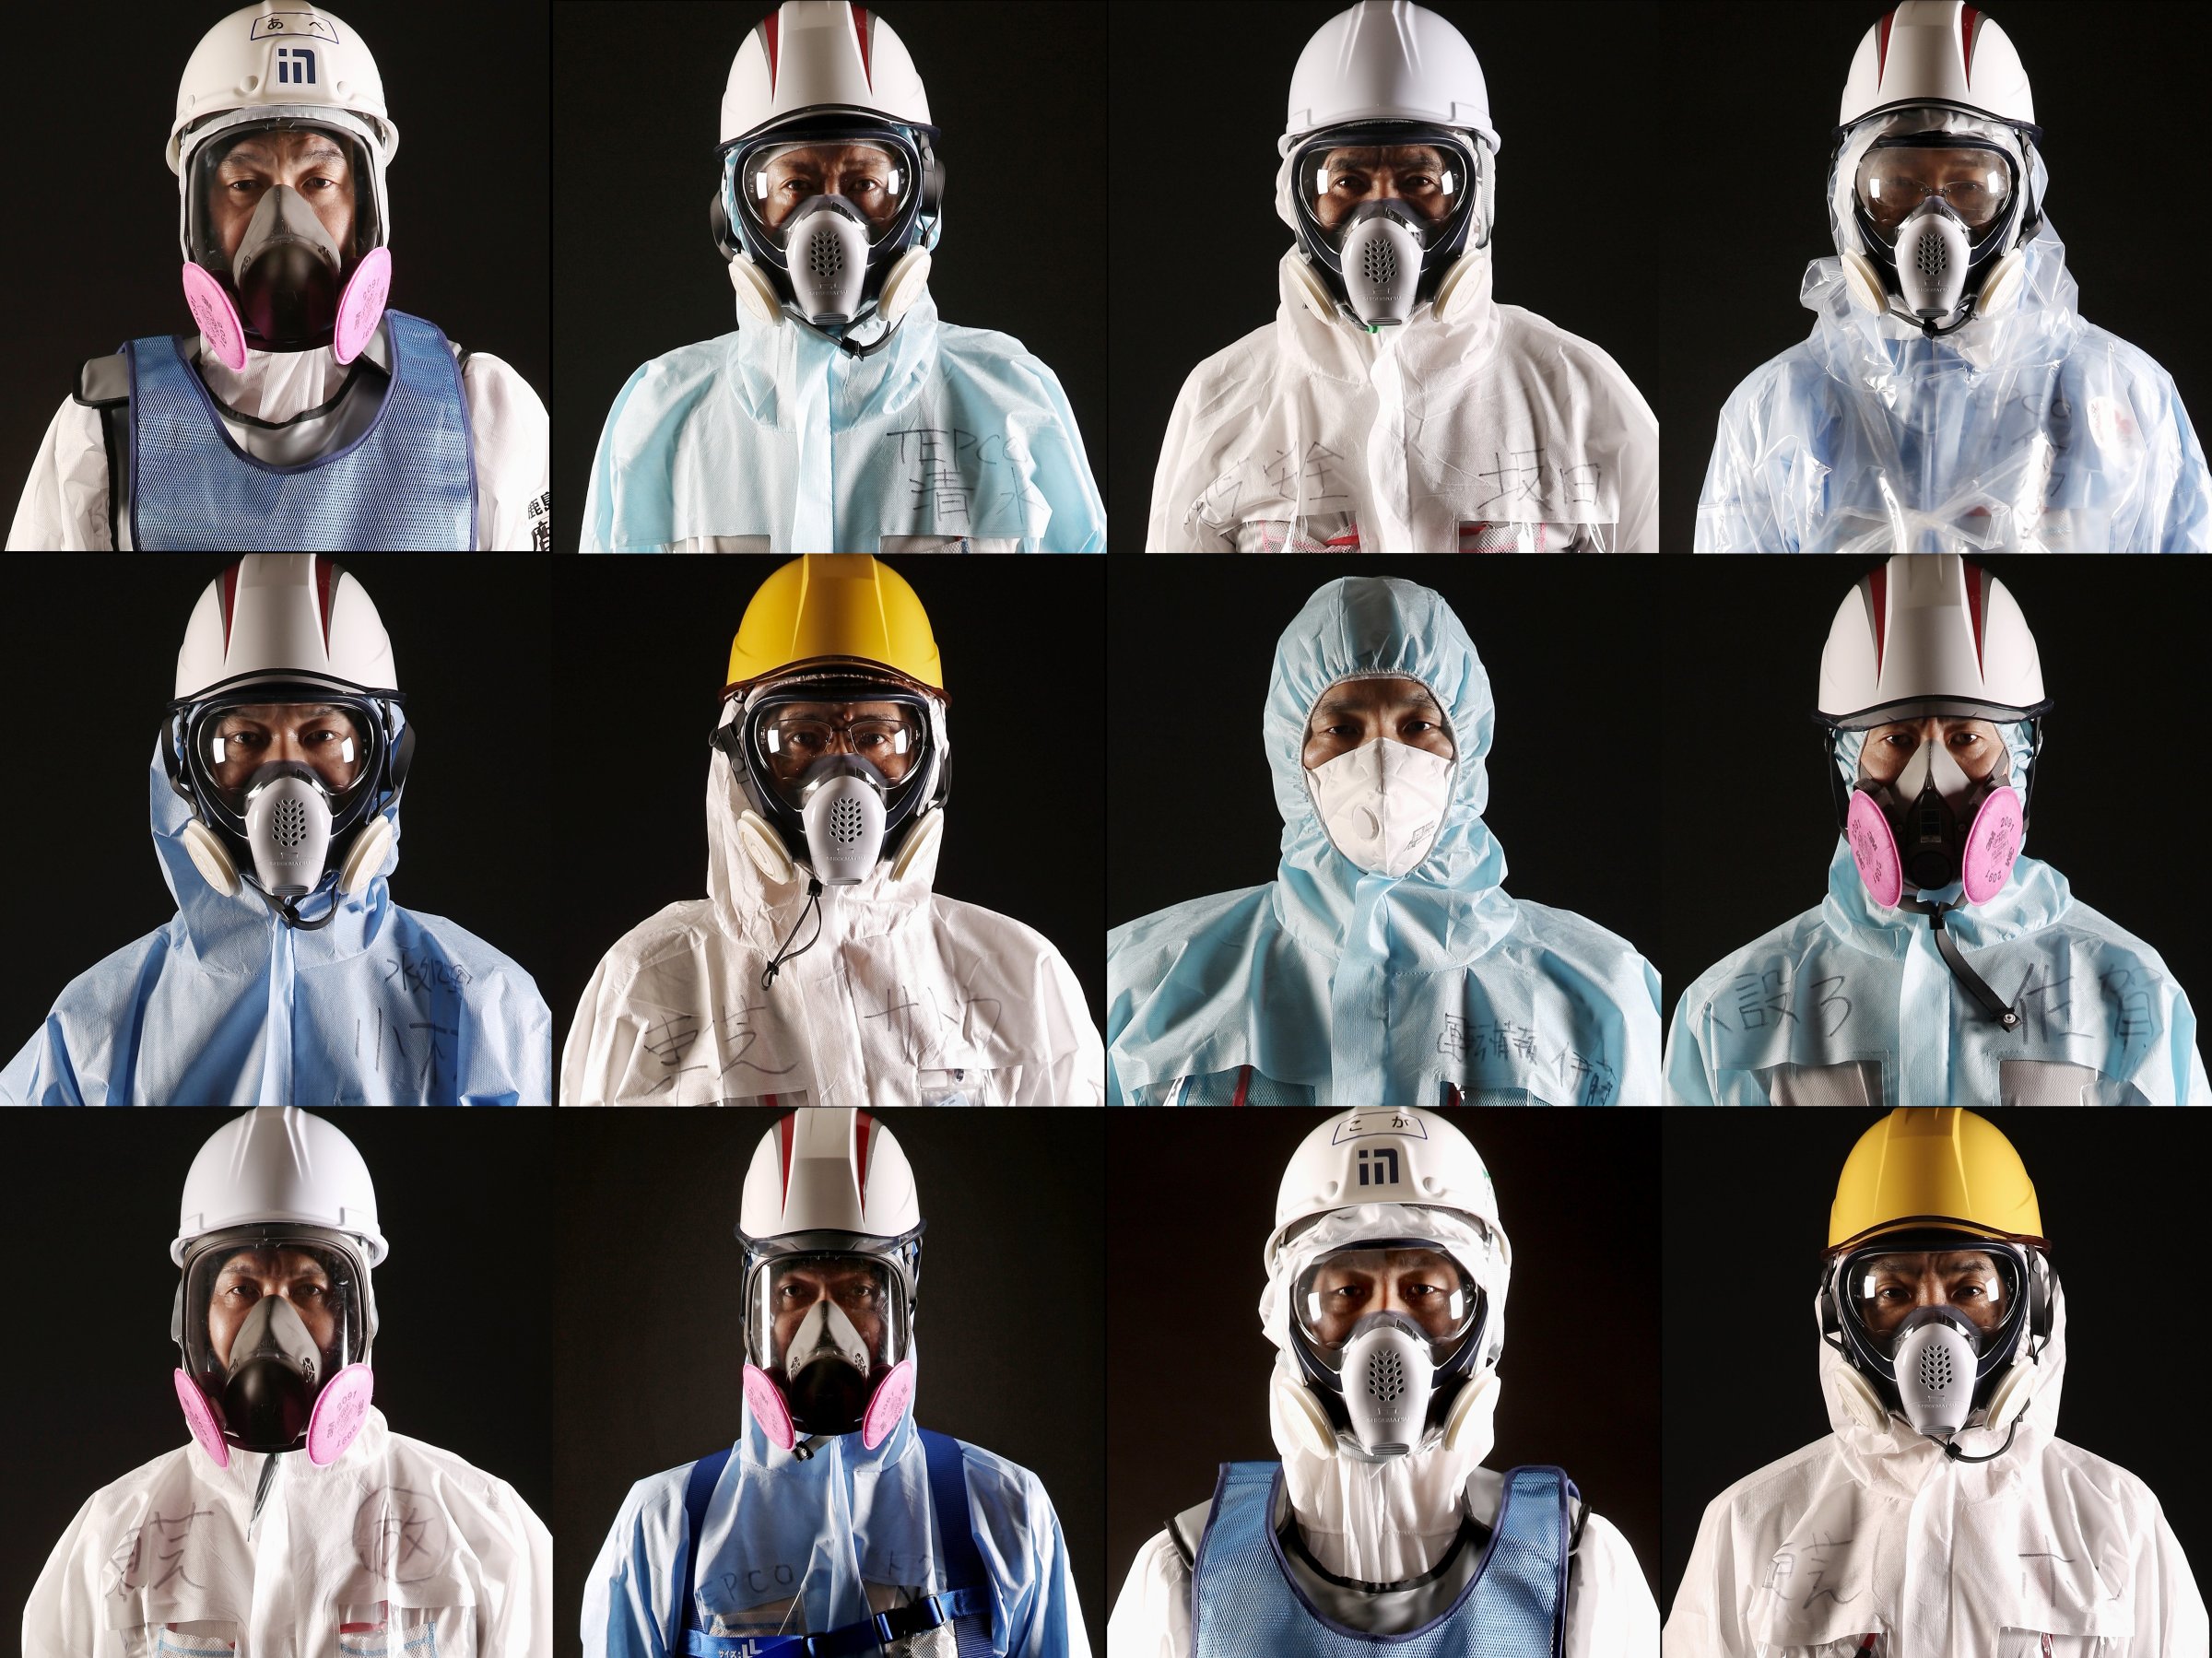 Workers of TEPCO and the Kajima Corporation pose for portraits at the Fukushima Daiichi nuclear power plant in Okuma, Japan, Feb. 23, 2016. March 11 marks the fifth anniversary of the 9.0-magnitude earthquake and tsunami that killed some 16,000 people, as well as the subsequent damage to the reactors at TEPCO's Fukushima Daiichi Nuclear Power Plant.